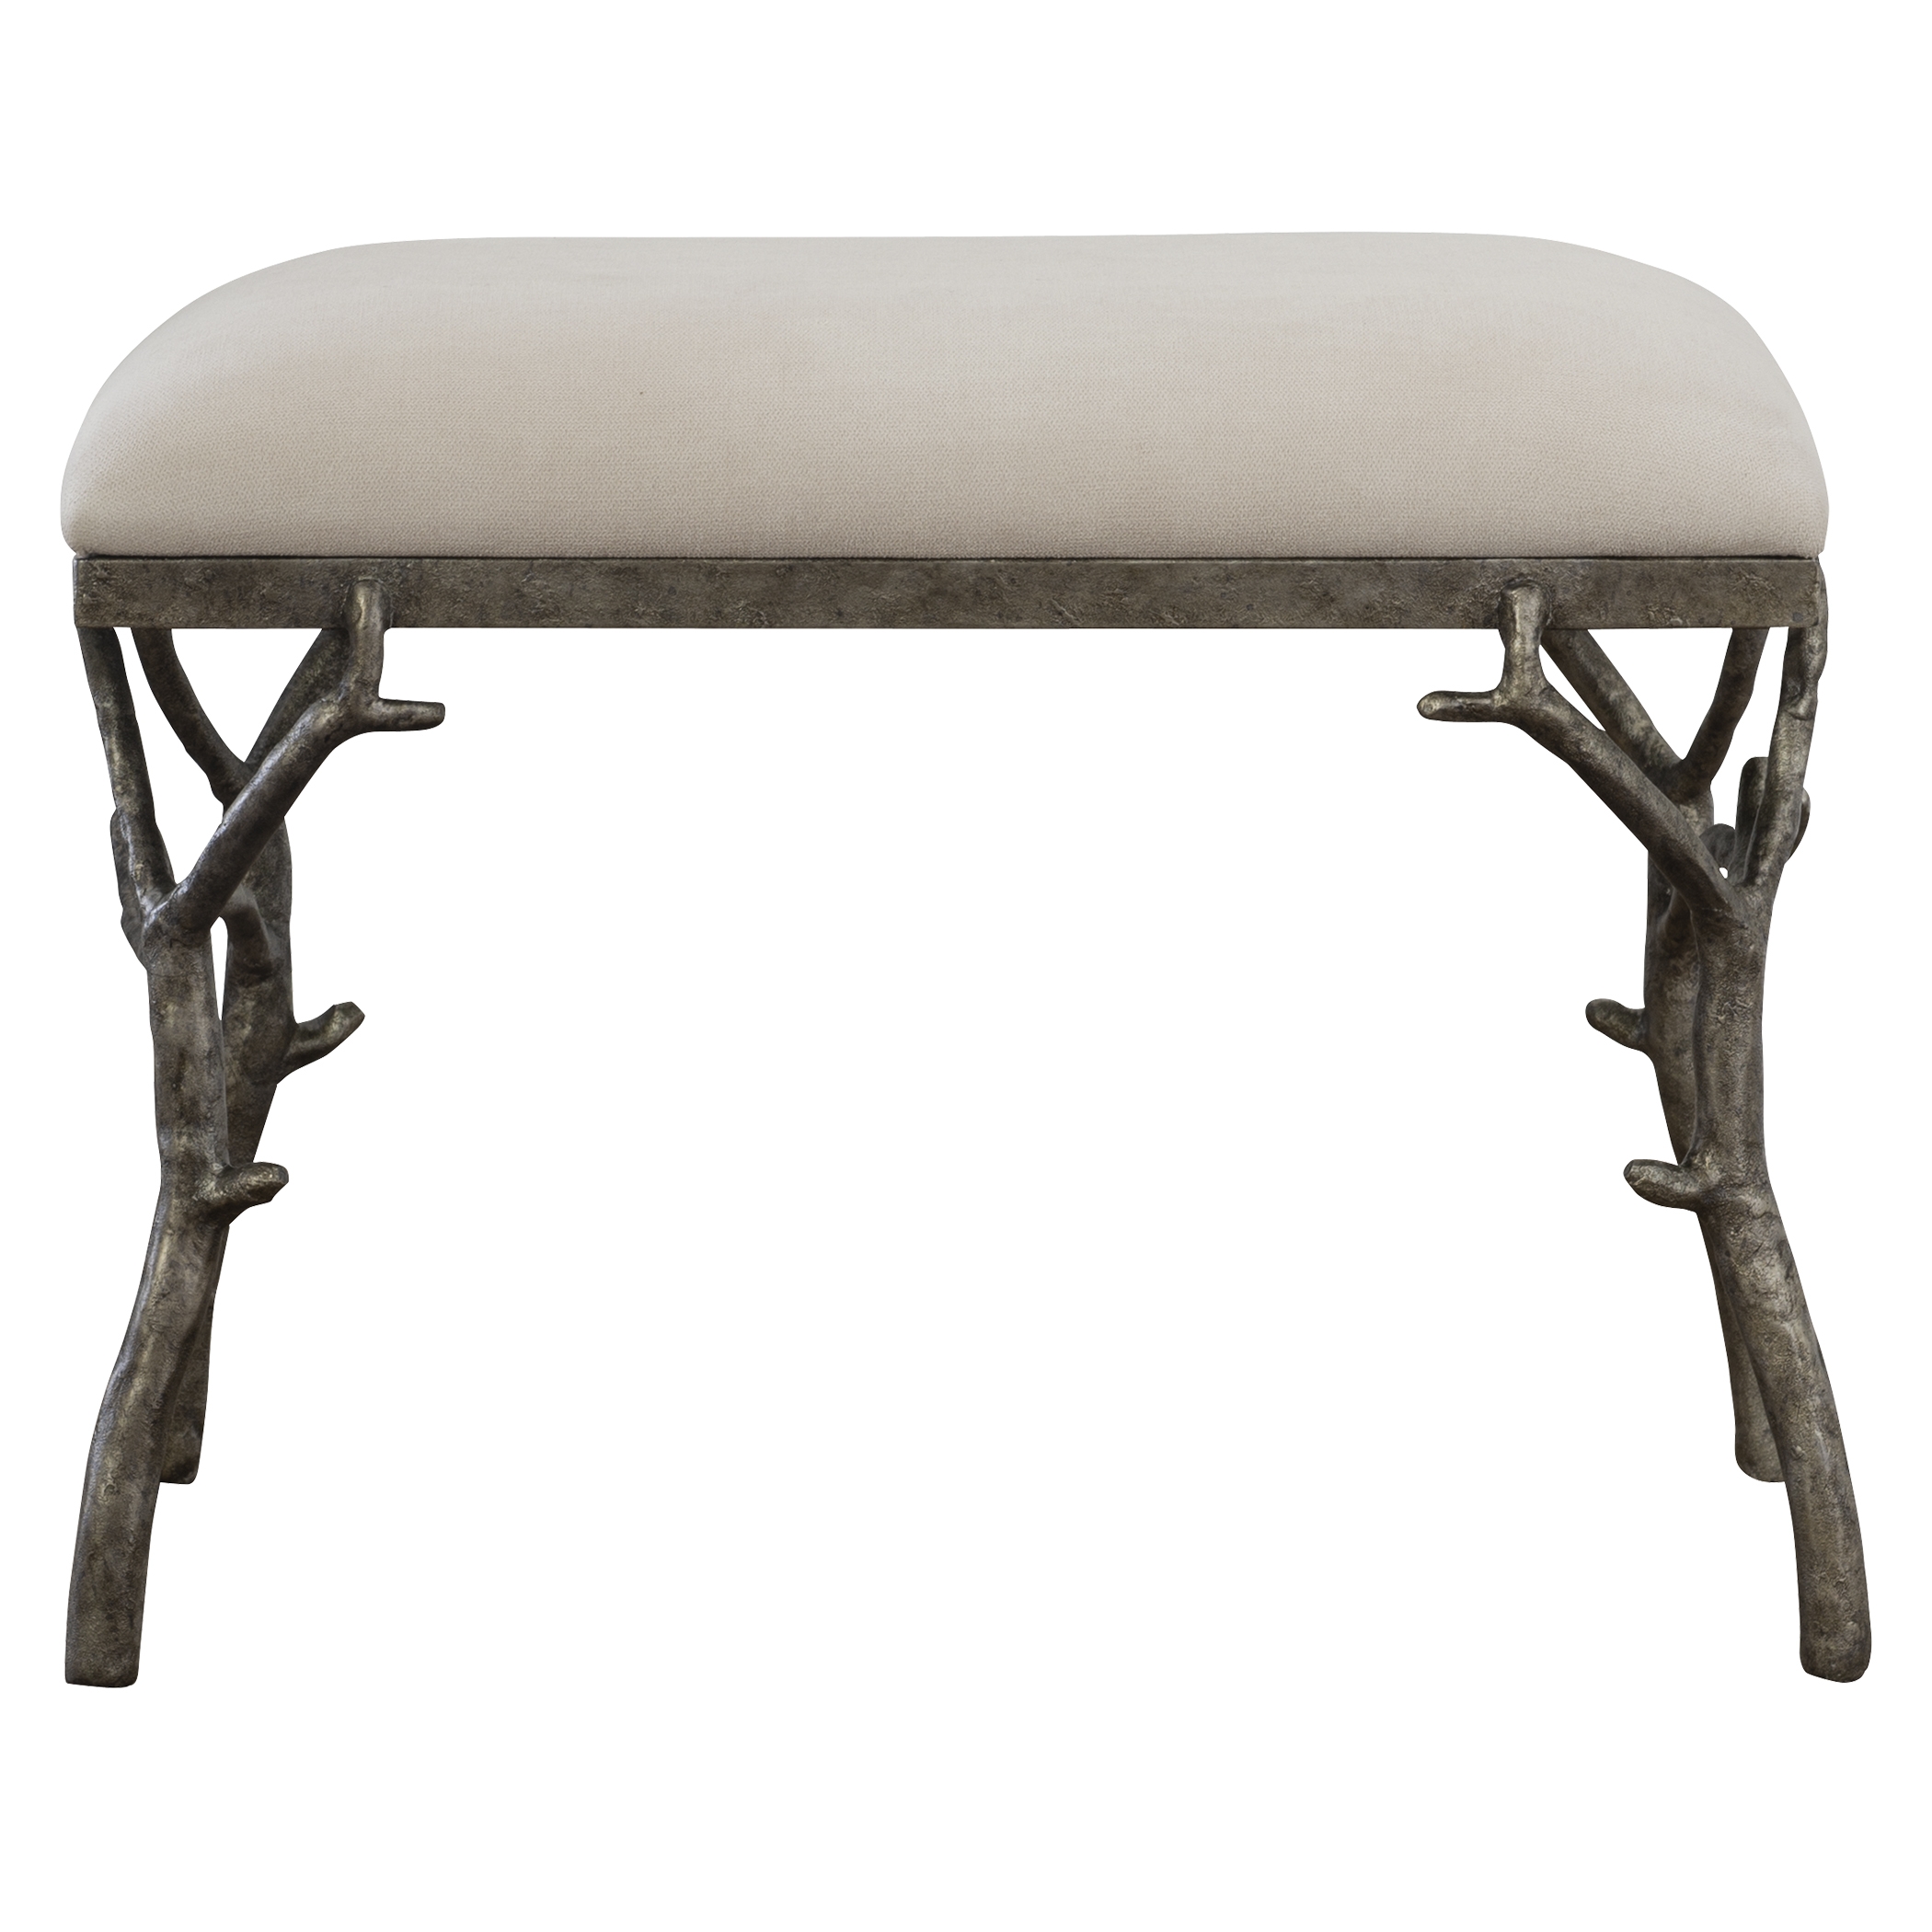 Lismore Small Fabric Bench - Image 2